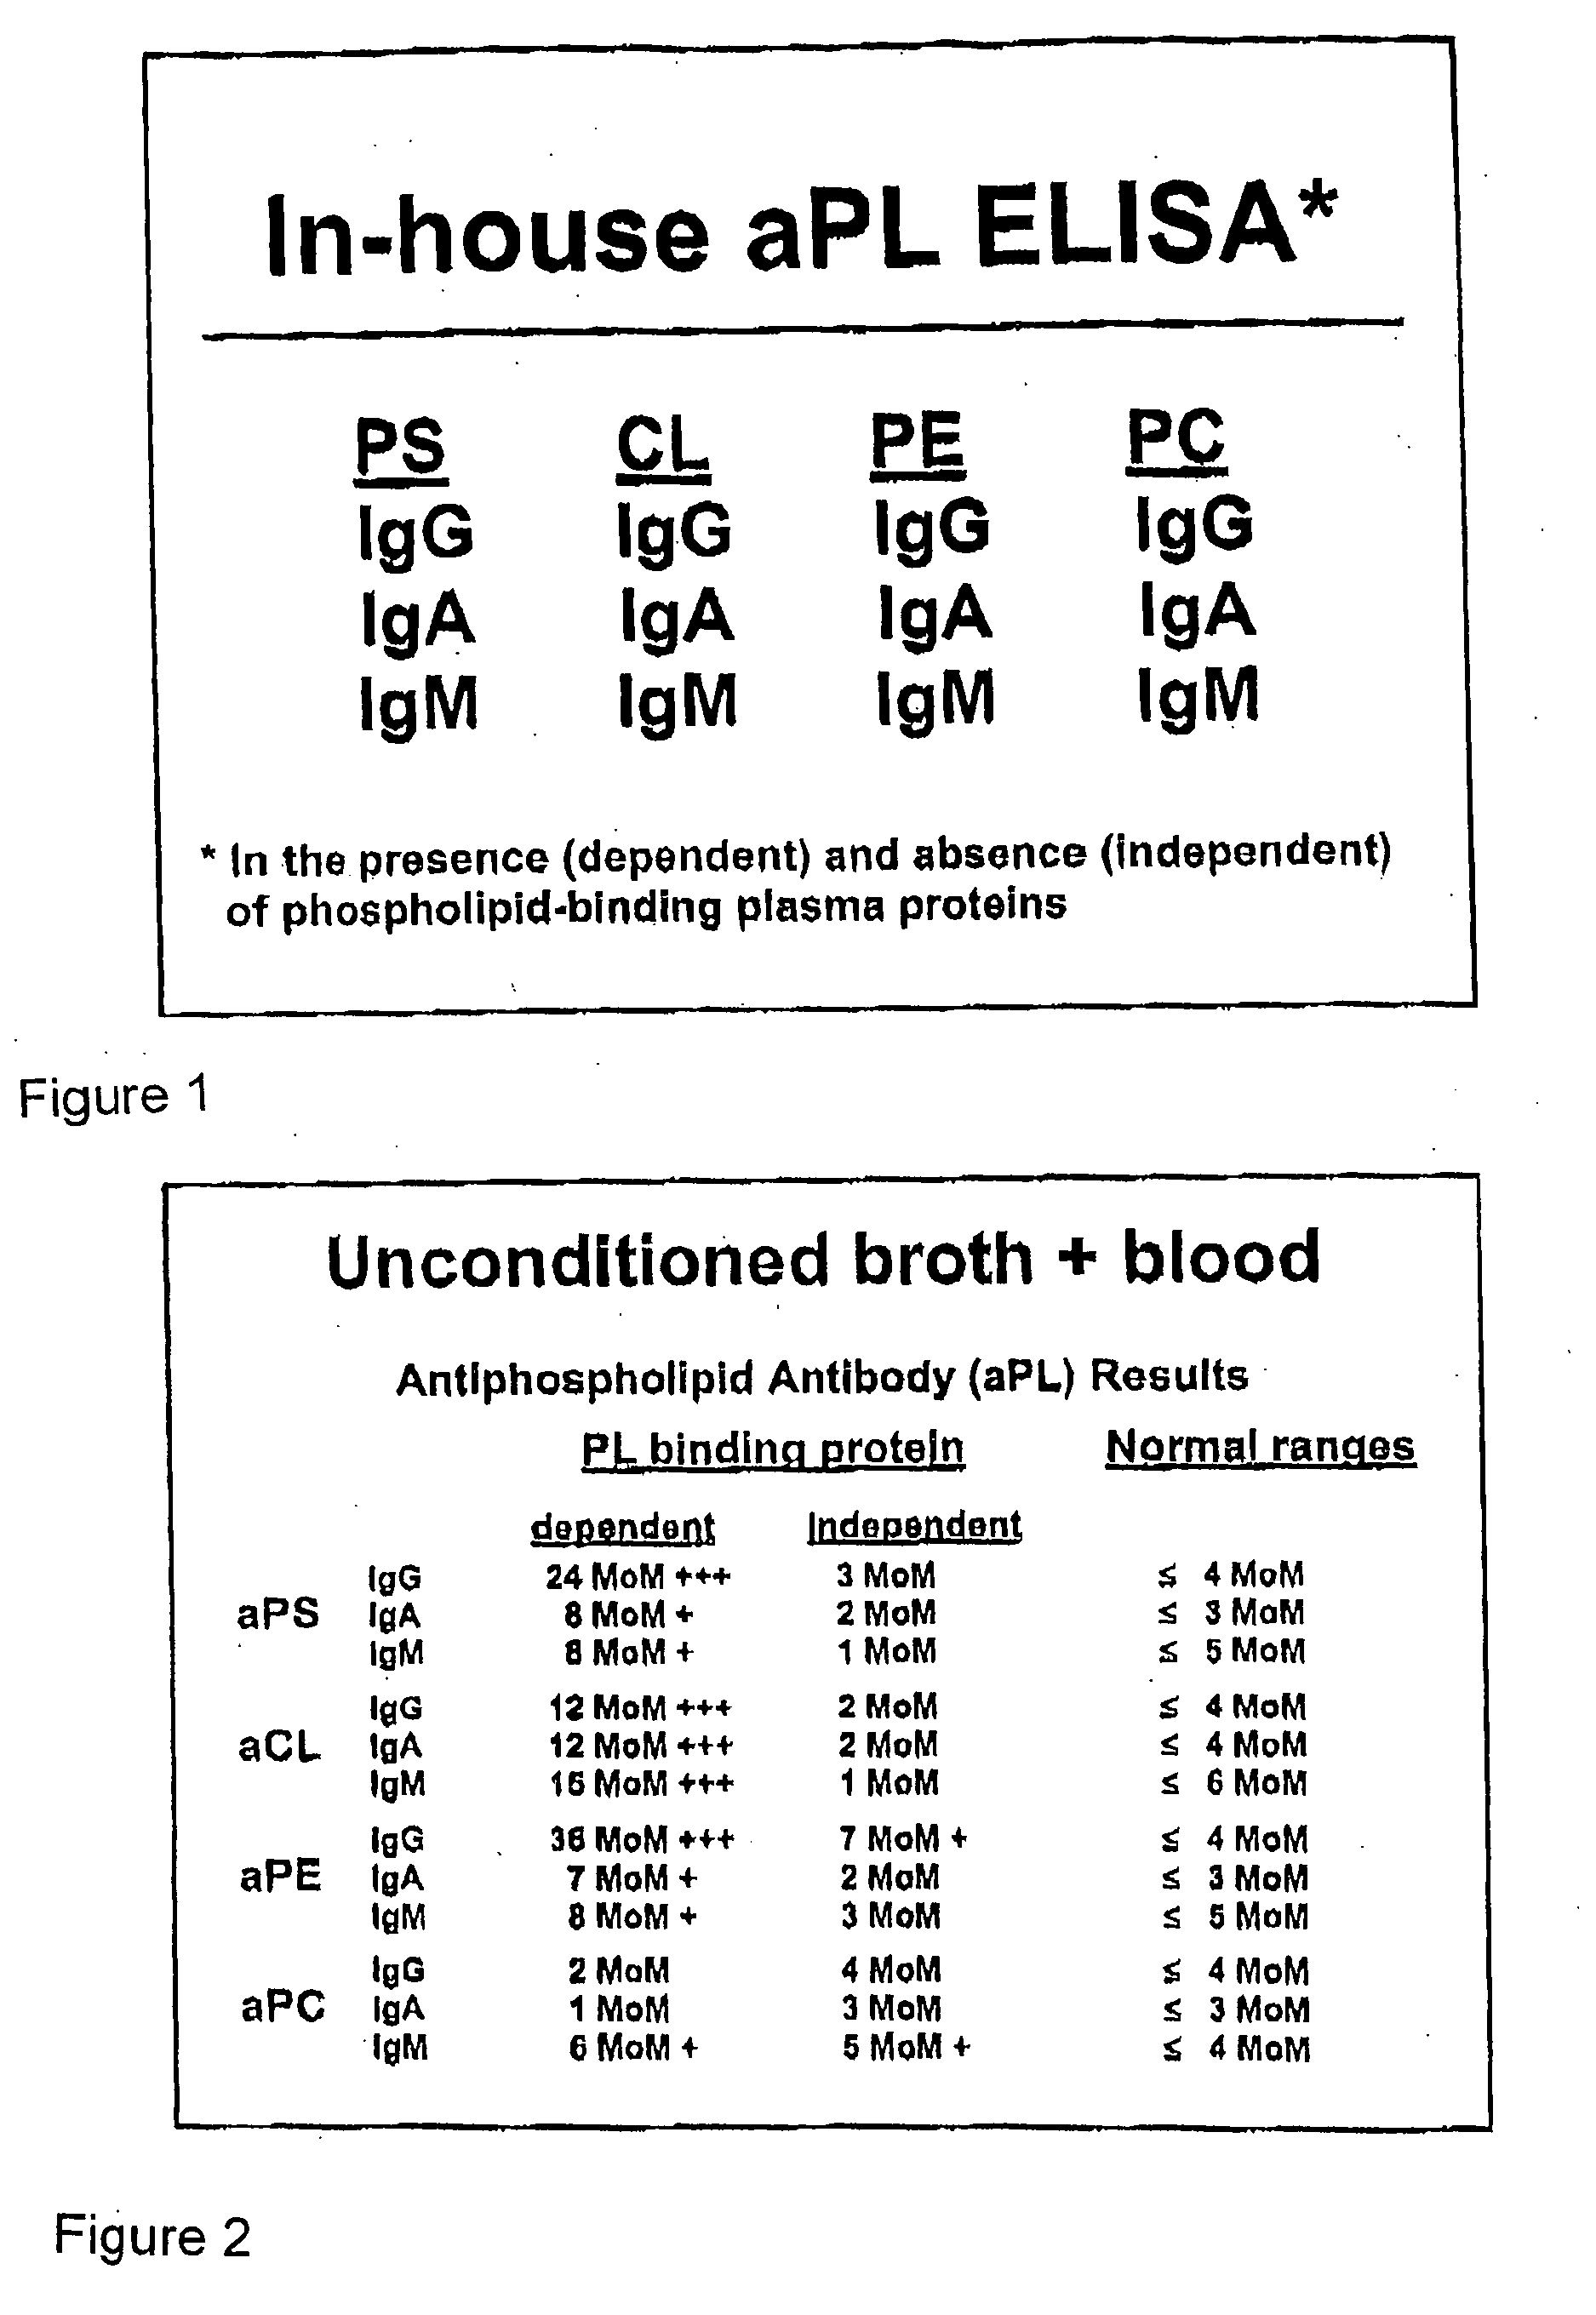 Method of altering the binding specificity of proteins by oxidation-reduction reactions